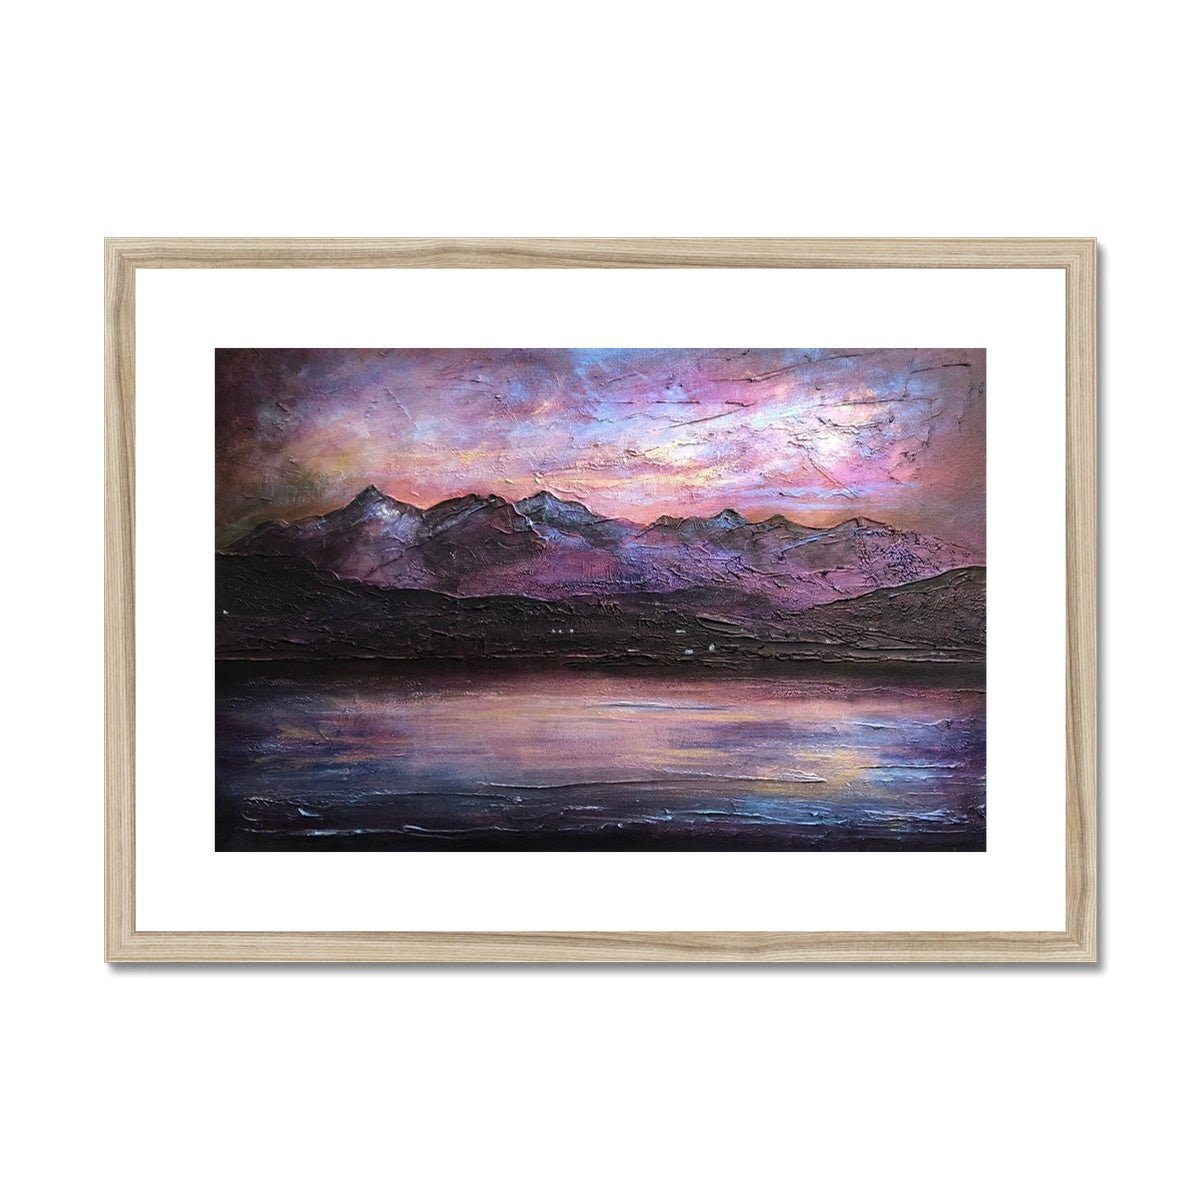 Last Skye Light Painting | Framed & Mounted Prints From Scotland-Framed & Mounted Prints-Skye Art Gallery-A2 Landscape-Natural Frame-Paintings, Prints, Homeware, Art Gifts From Scotland By Scottish Artist Kevin Hunter